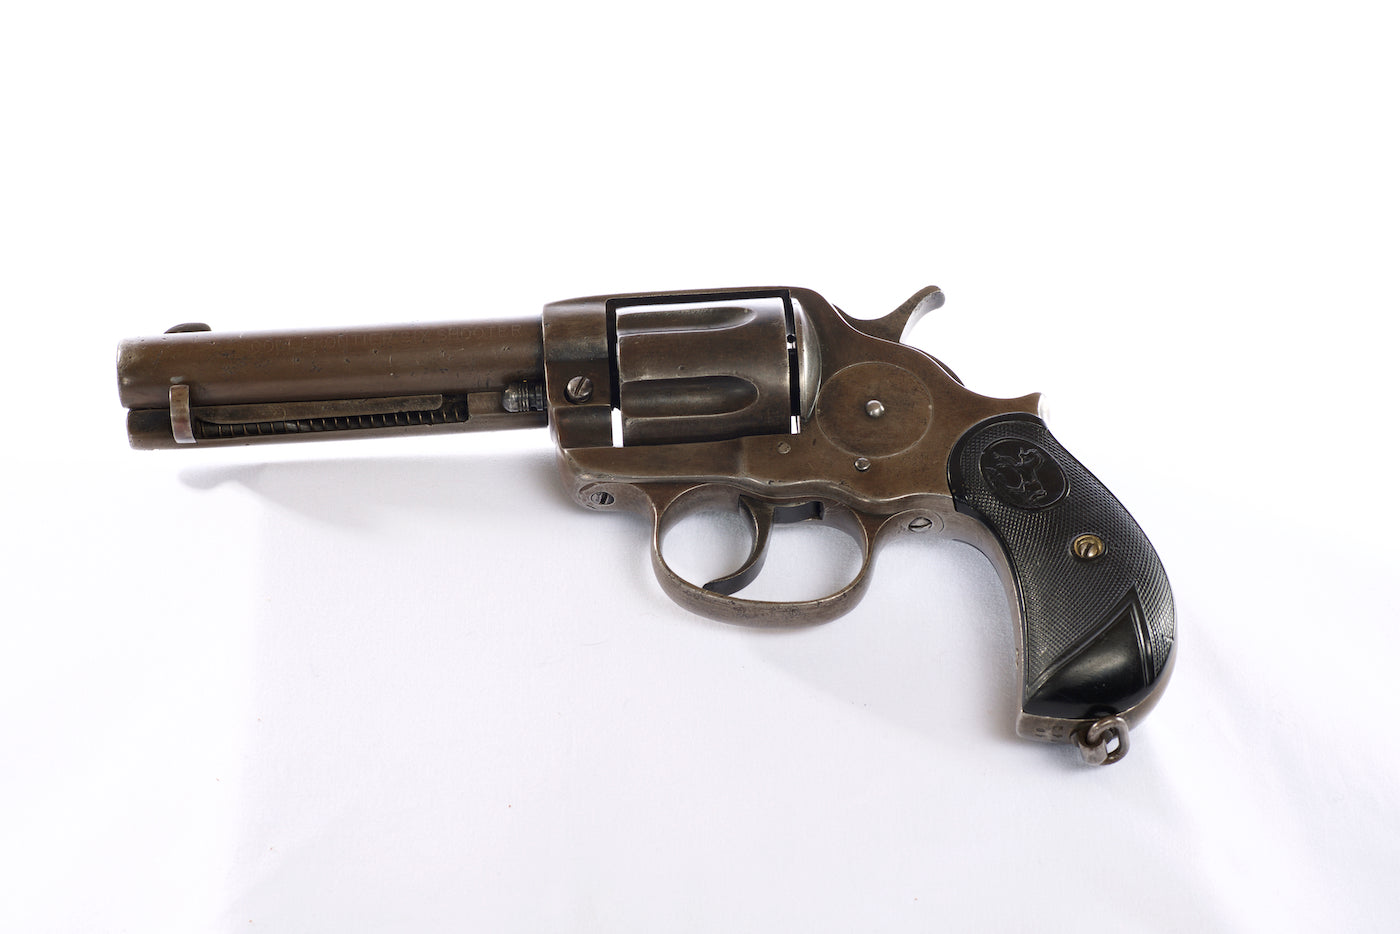 Colt  "FRONTIER SIX SHOOTER" - 45 cal early (possibly first) double action Colt revolver